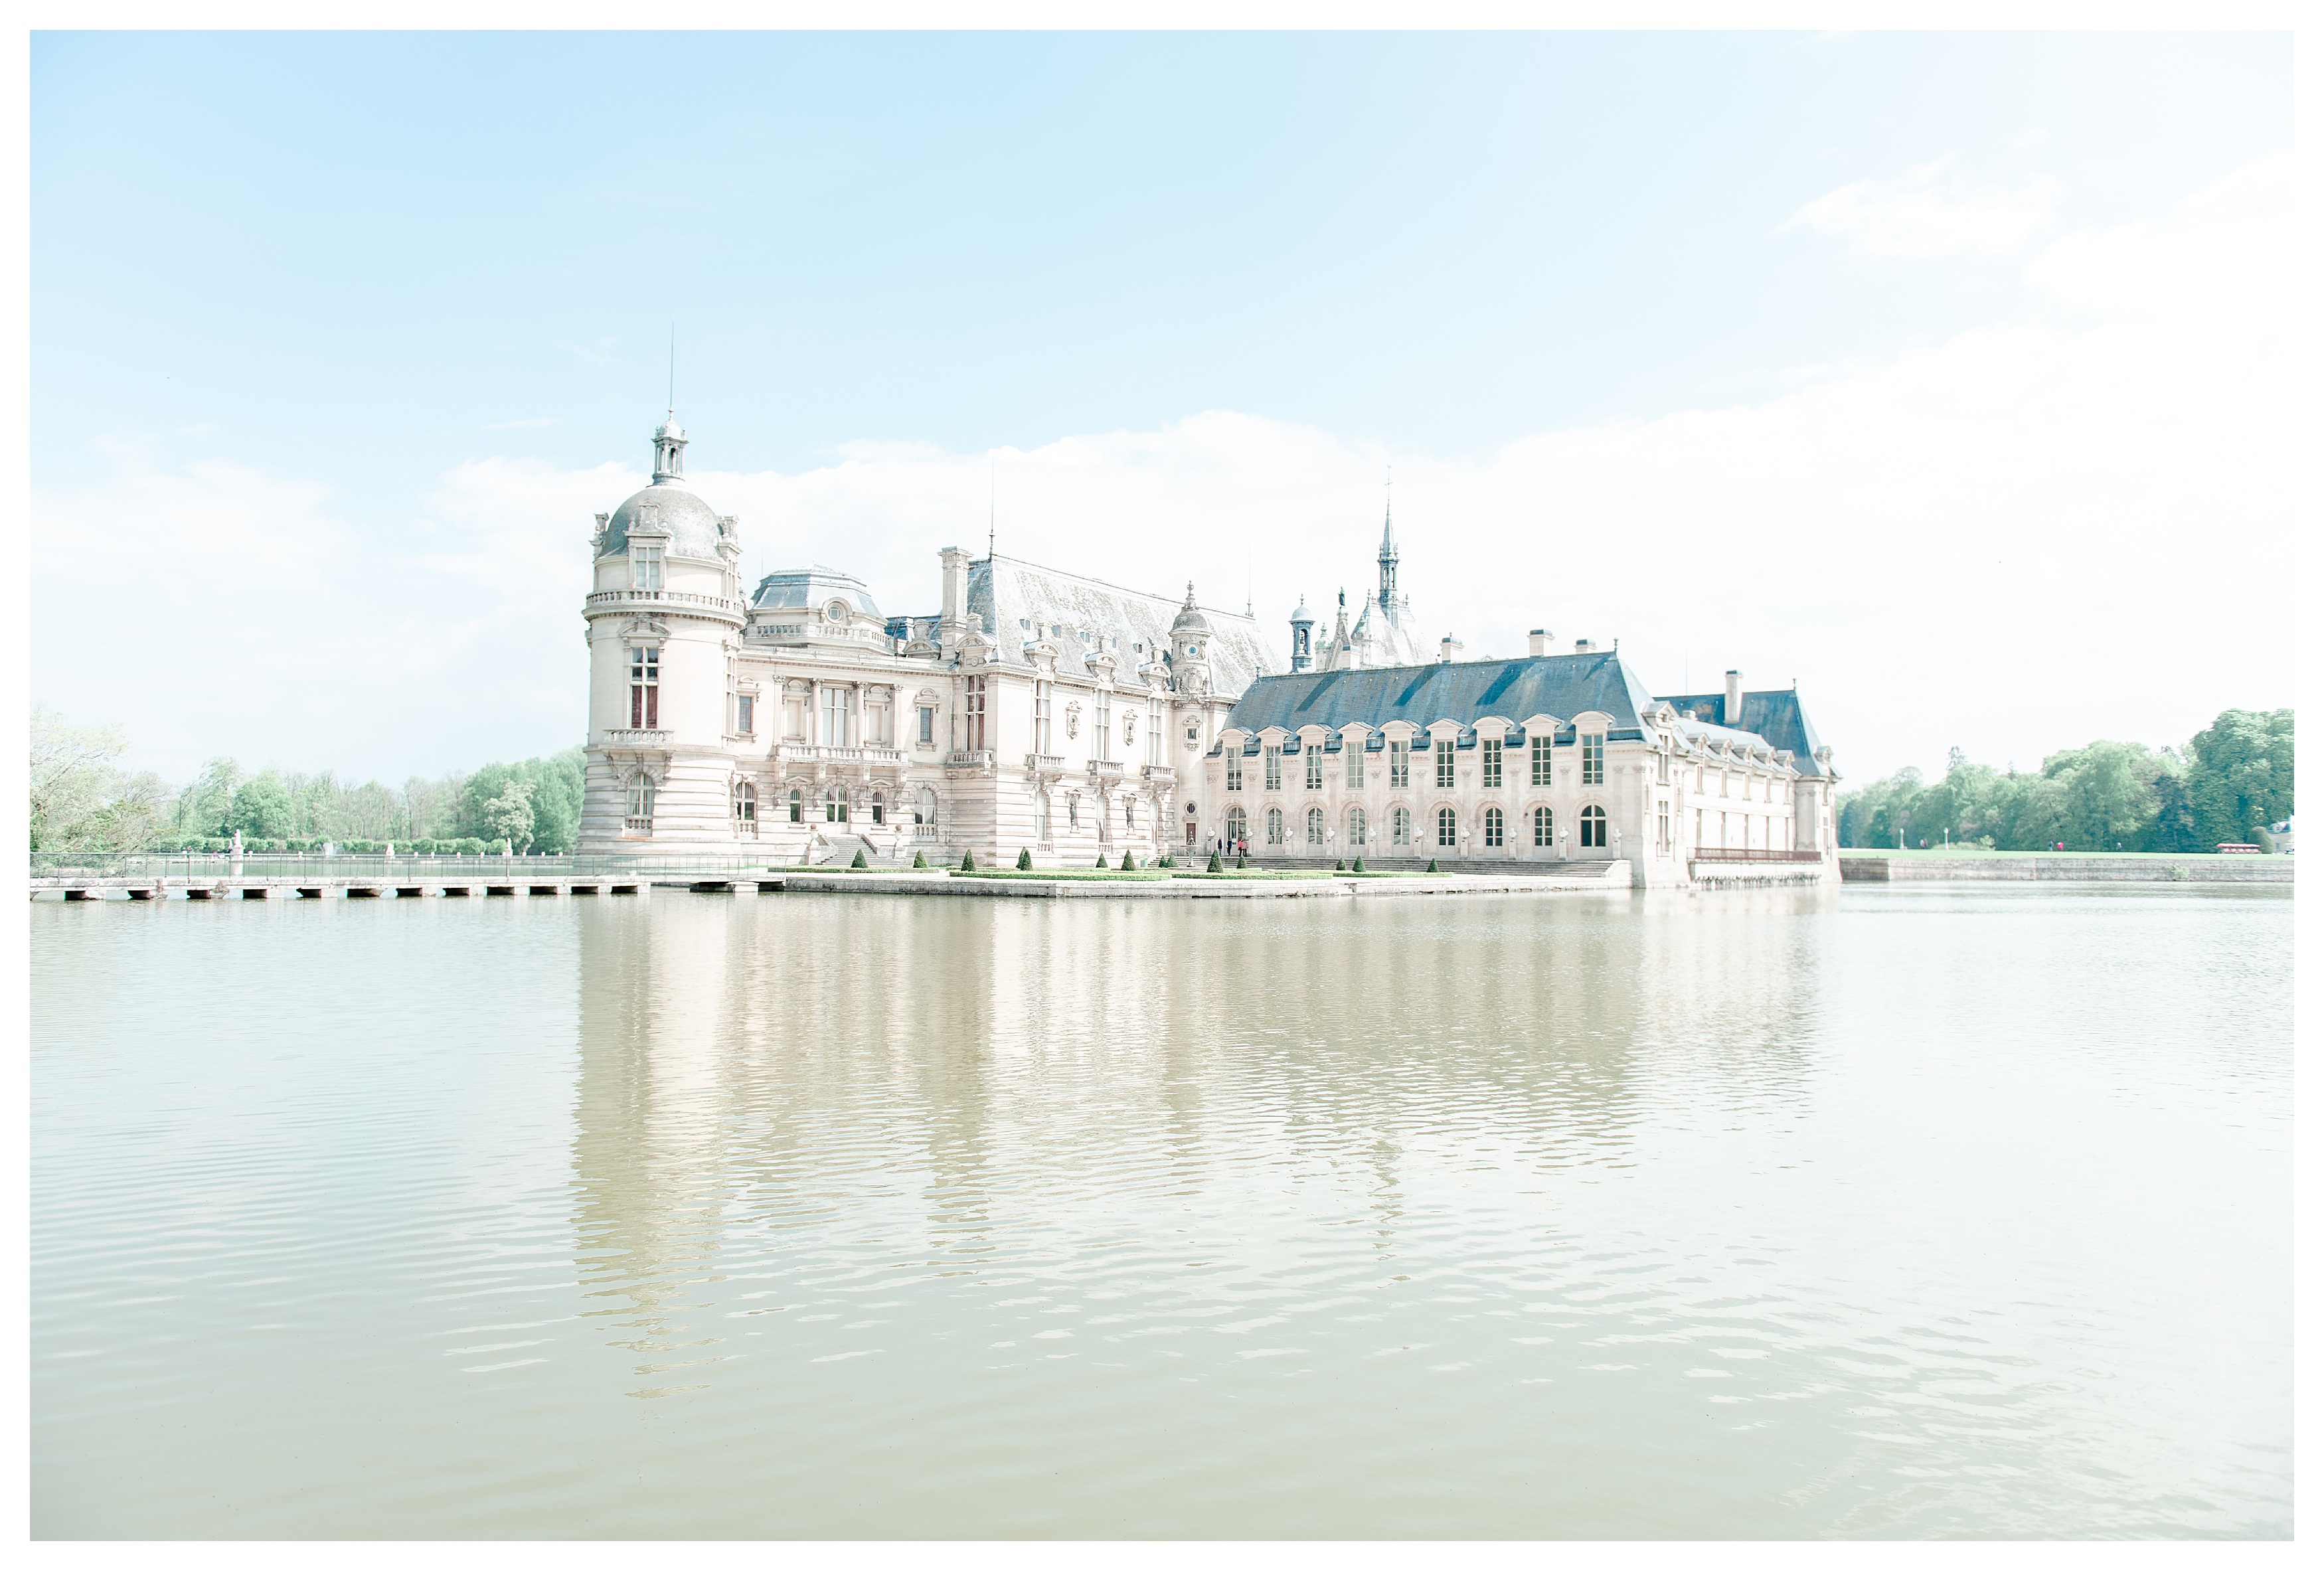 the entire château de chantilly as seen from across the lagoon